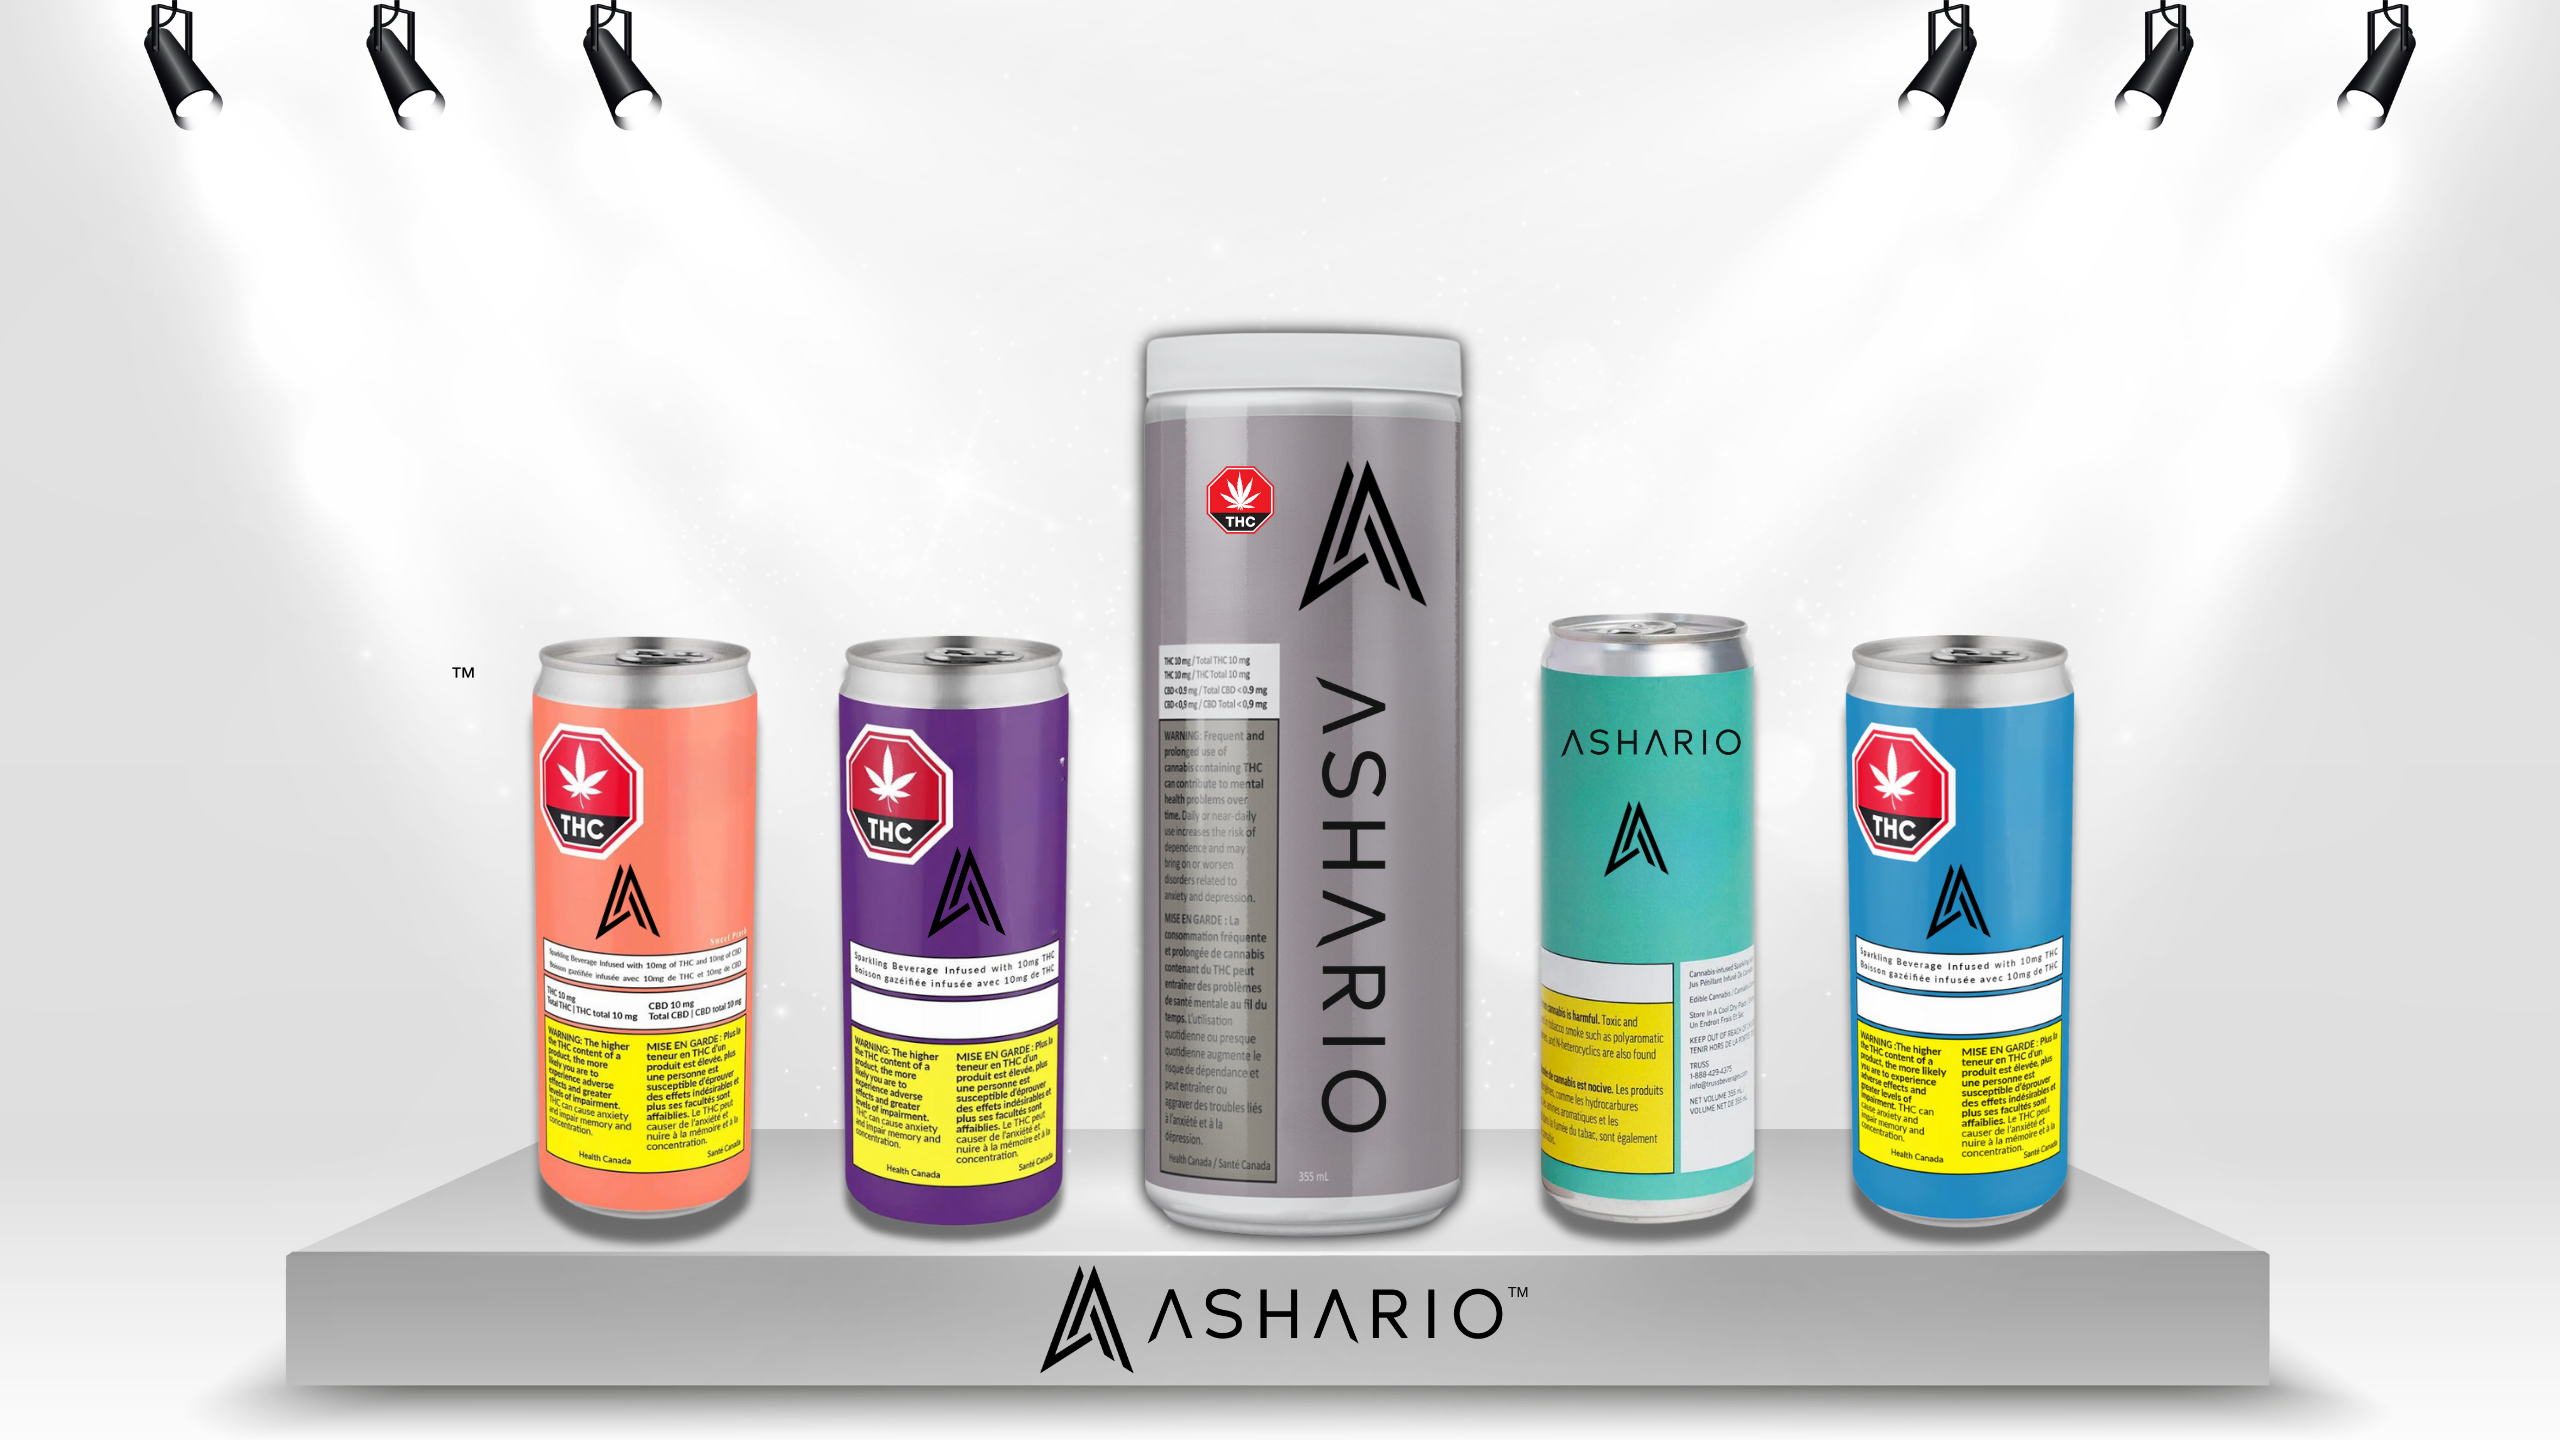 Discover THC drinks at Ashario Cannabis, offering a variety of flavors and effects for a convenient cannabis experience. Visit their dispensaries across the GTA to explore their selection.